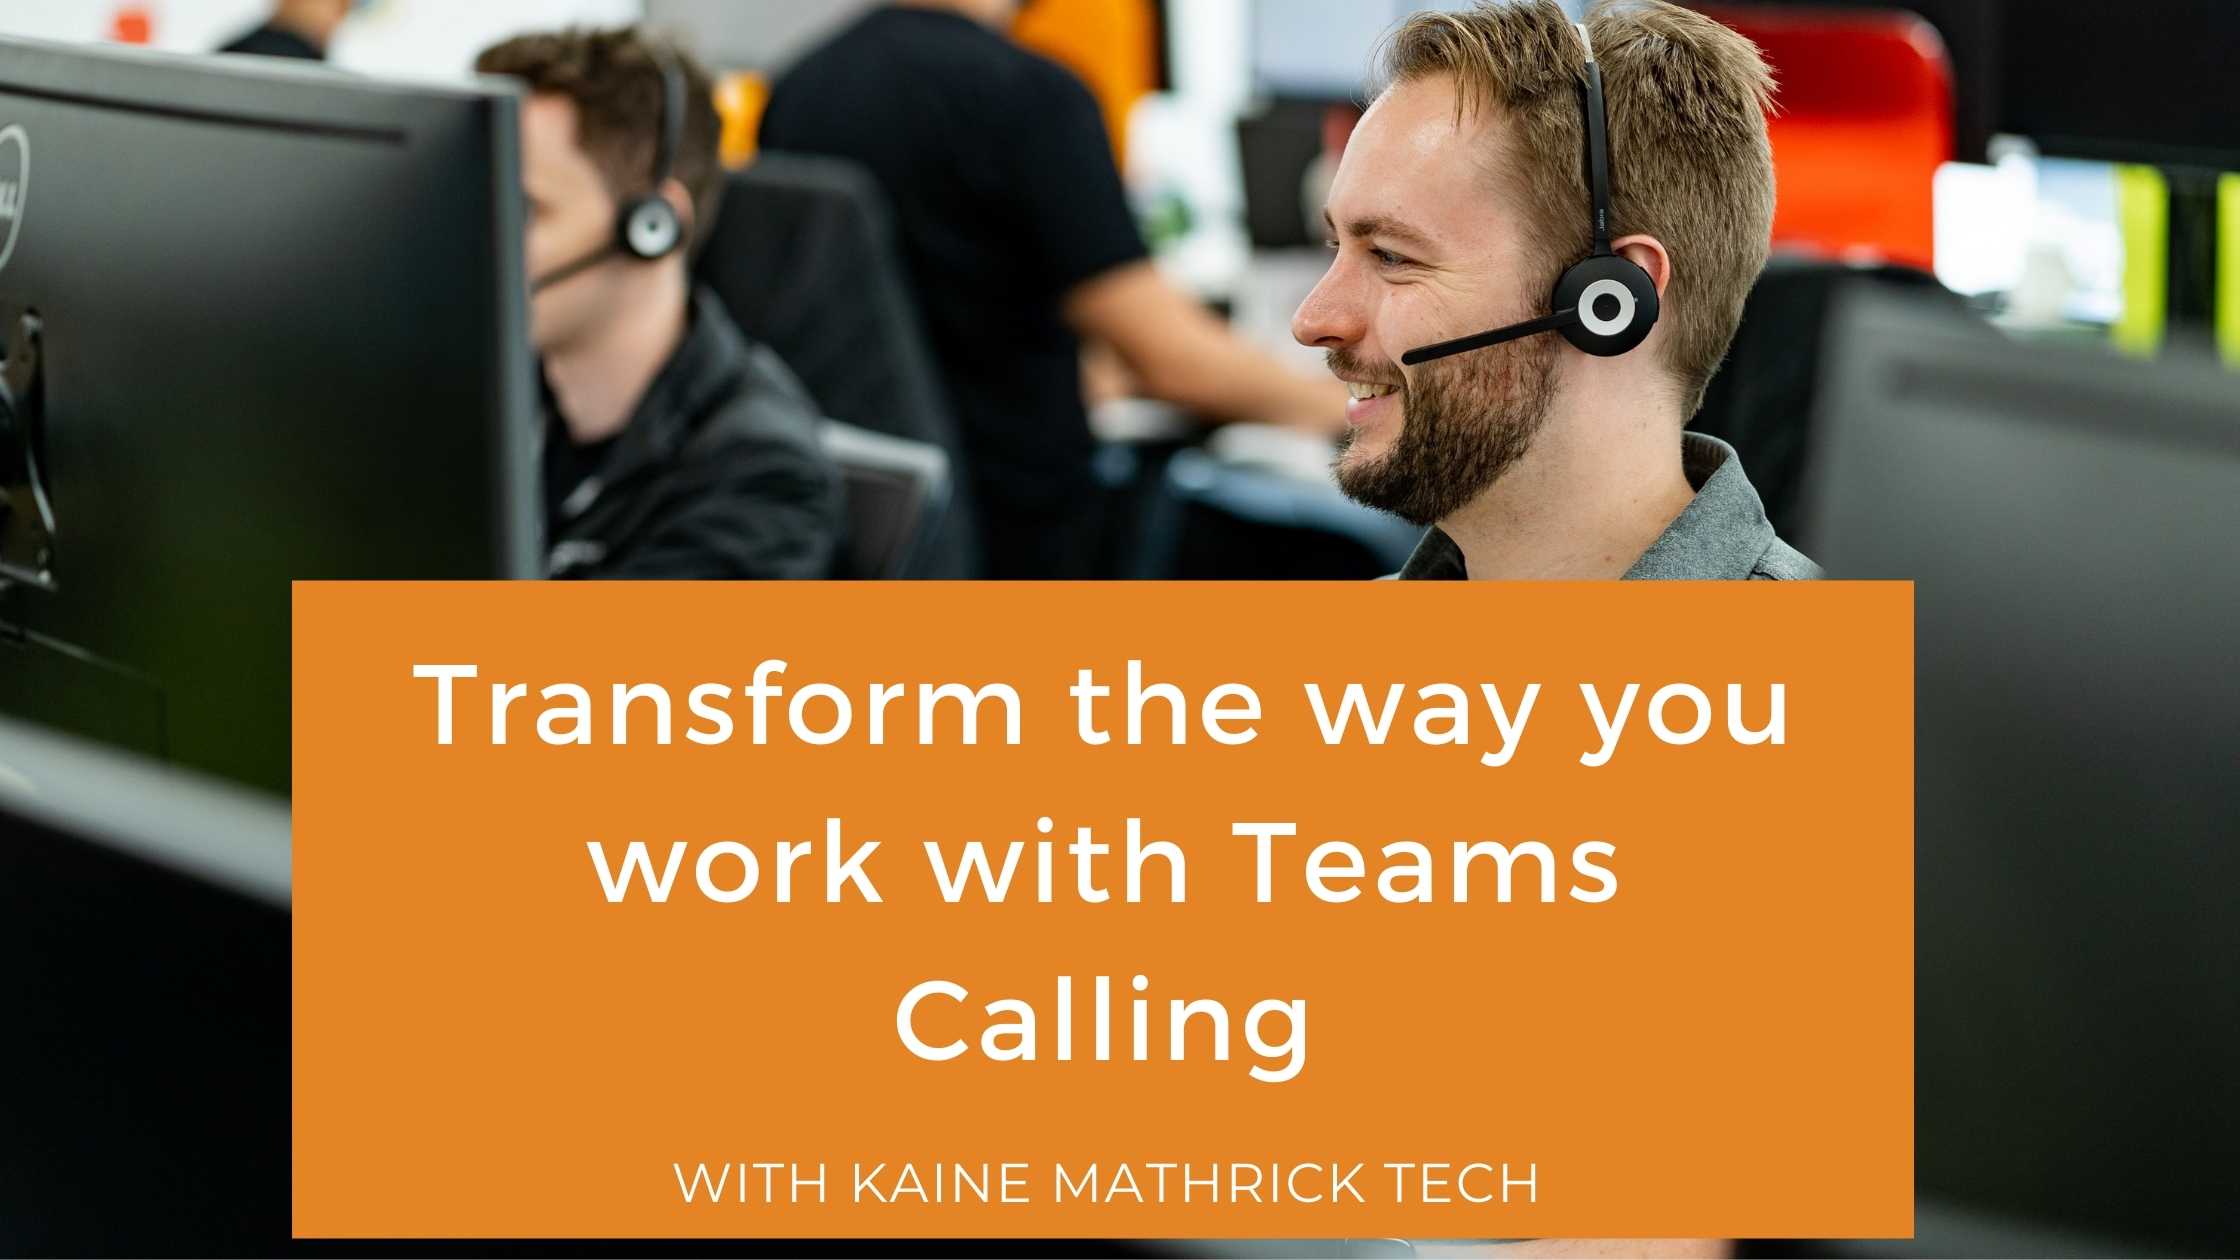 Transform the way you work with Teams Calling